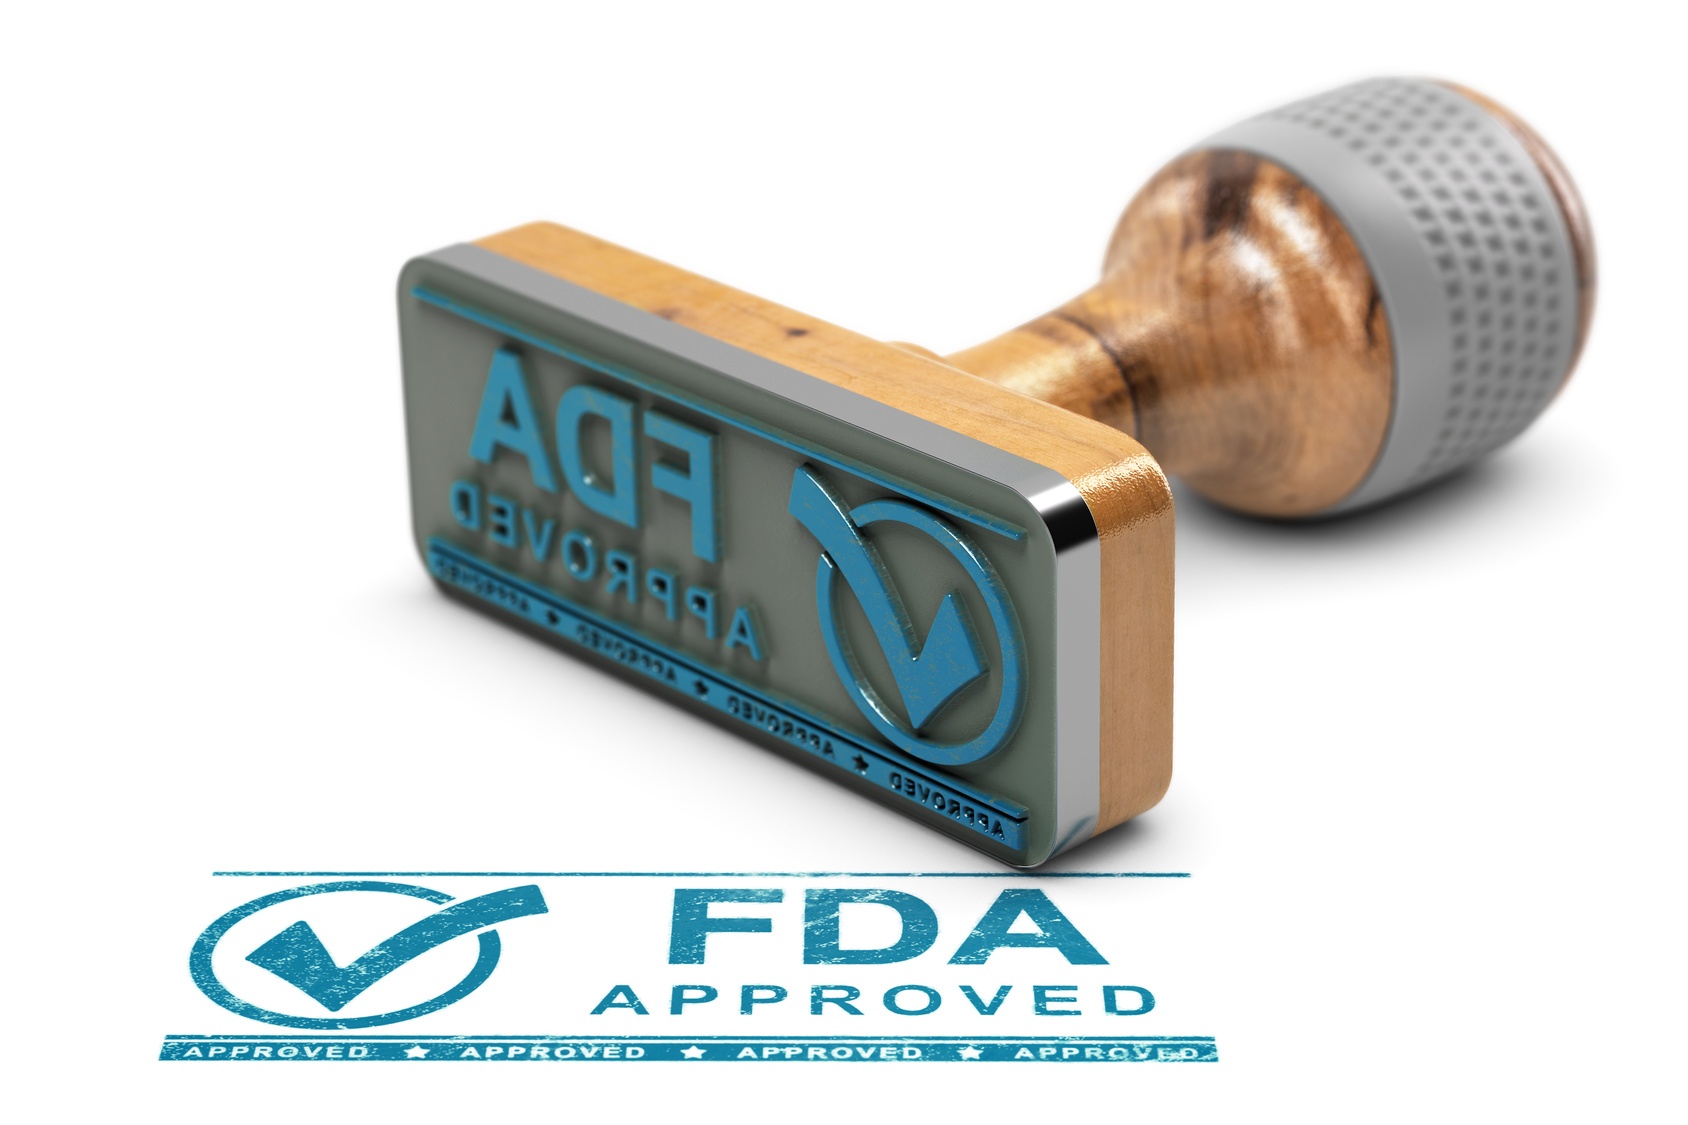  stay FDA compliant with version control